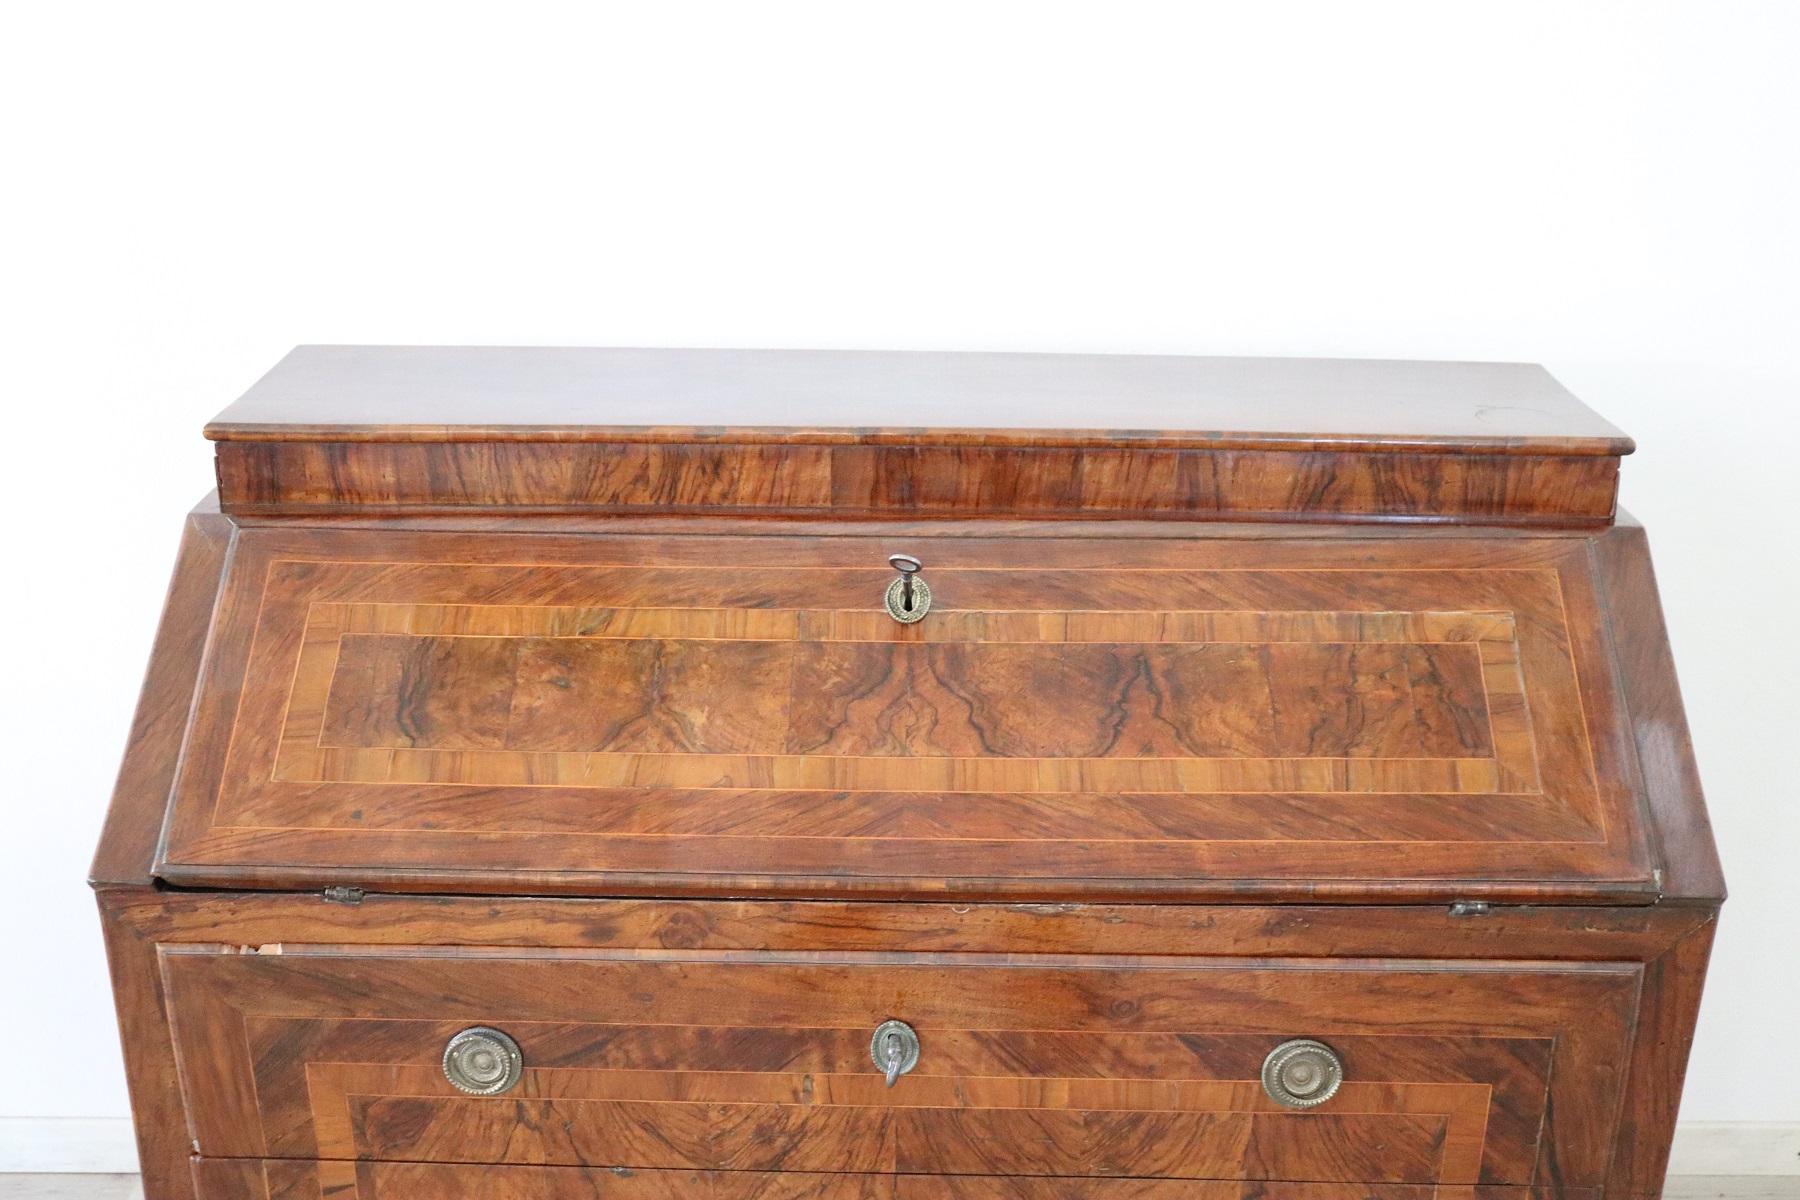 Important elegant chest with secretaire inlaid with wood essences of various types, full Louis XVI period of clear taste and Lombard origin. Authentic period second half of the 1700, 18th century. The wood inlay work is extremely meticulous. Work